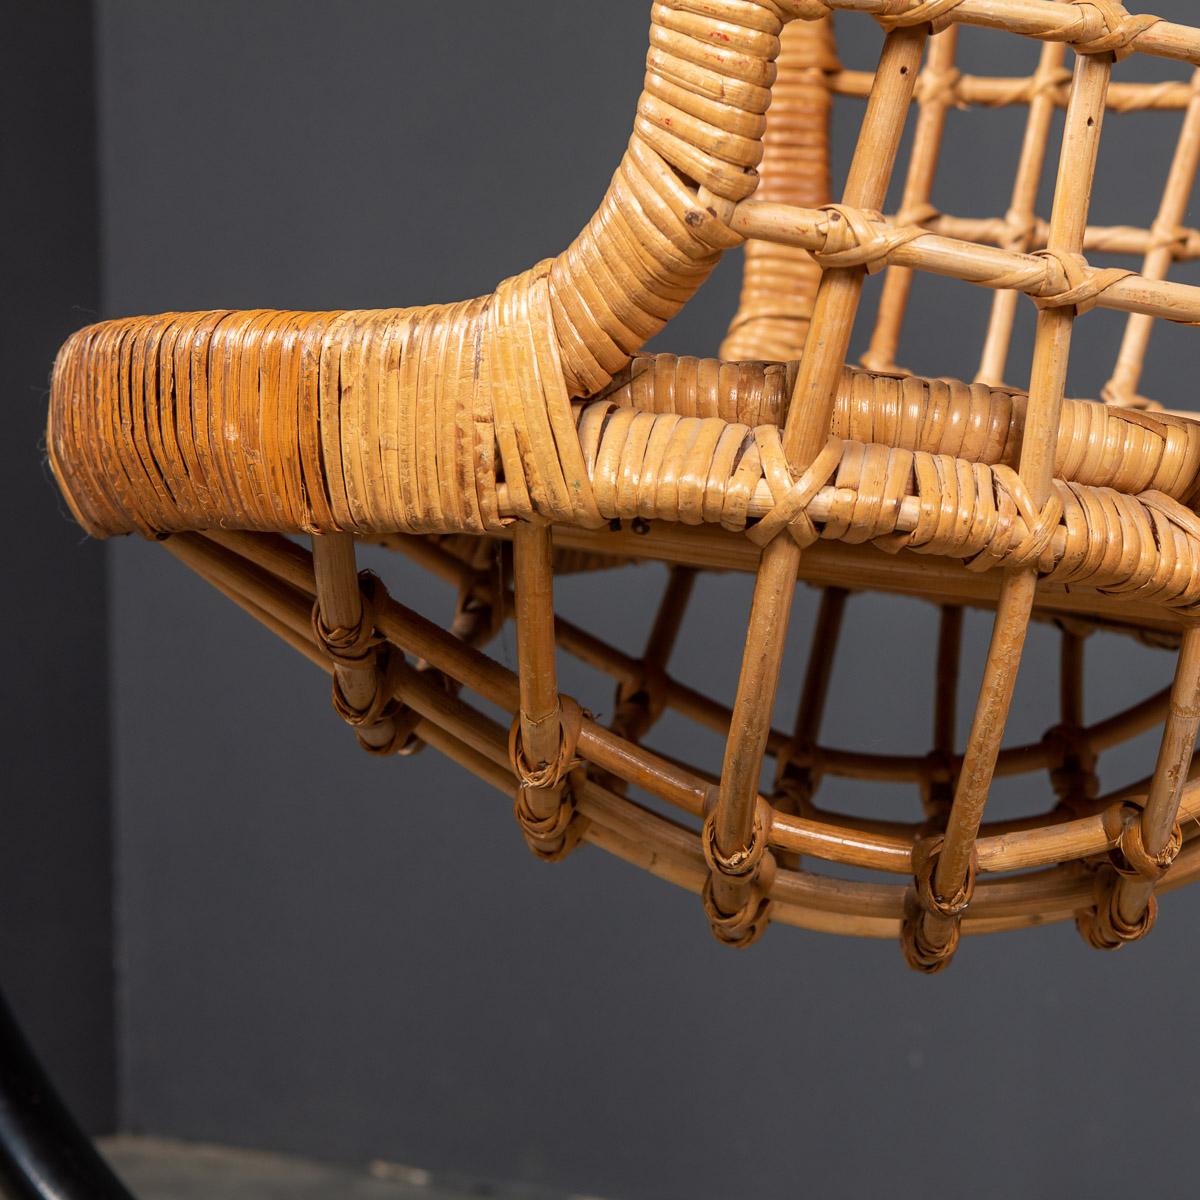 20th Century Hanging Wicker Woven Chair on Steel Frame, 1970s For Sale 8